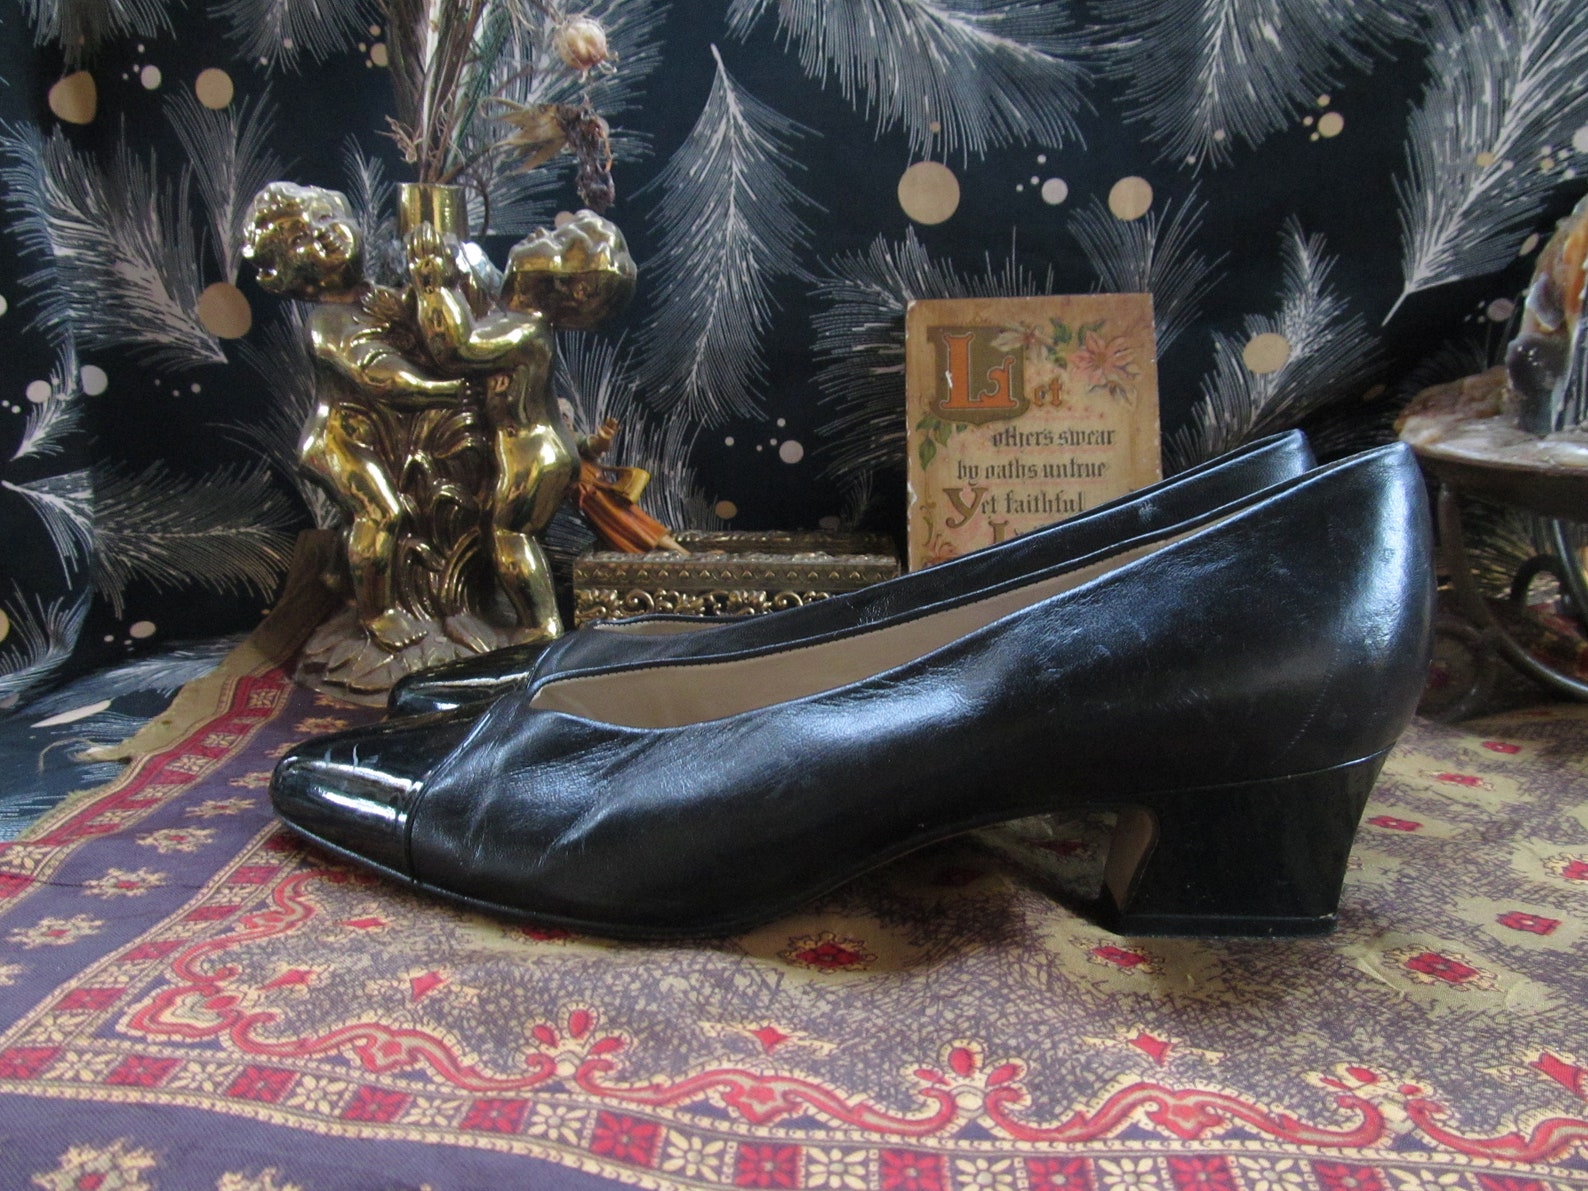 etienne aigner heels shoes pumps black patent leather pointy pointed toes ballet flat low kitten curved heel witchy goth granny